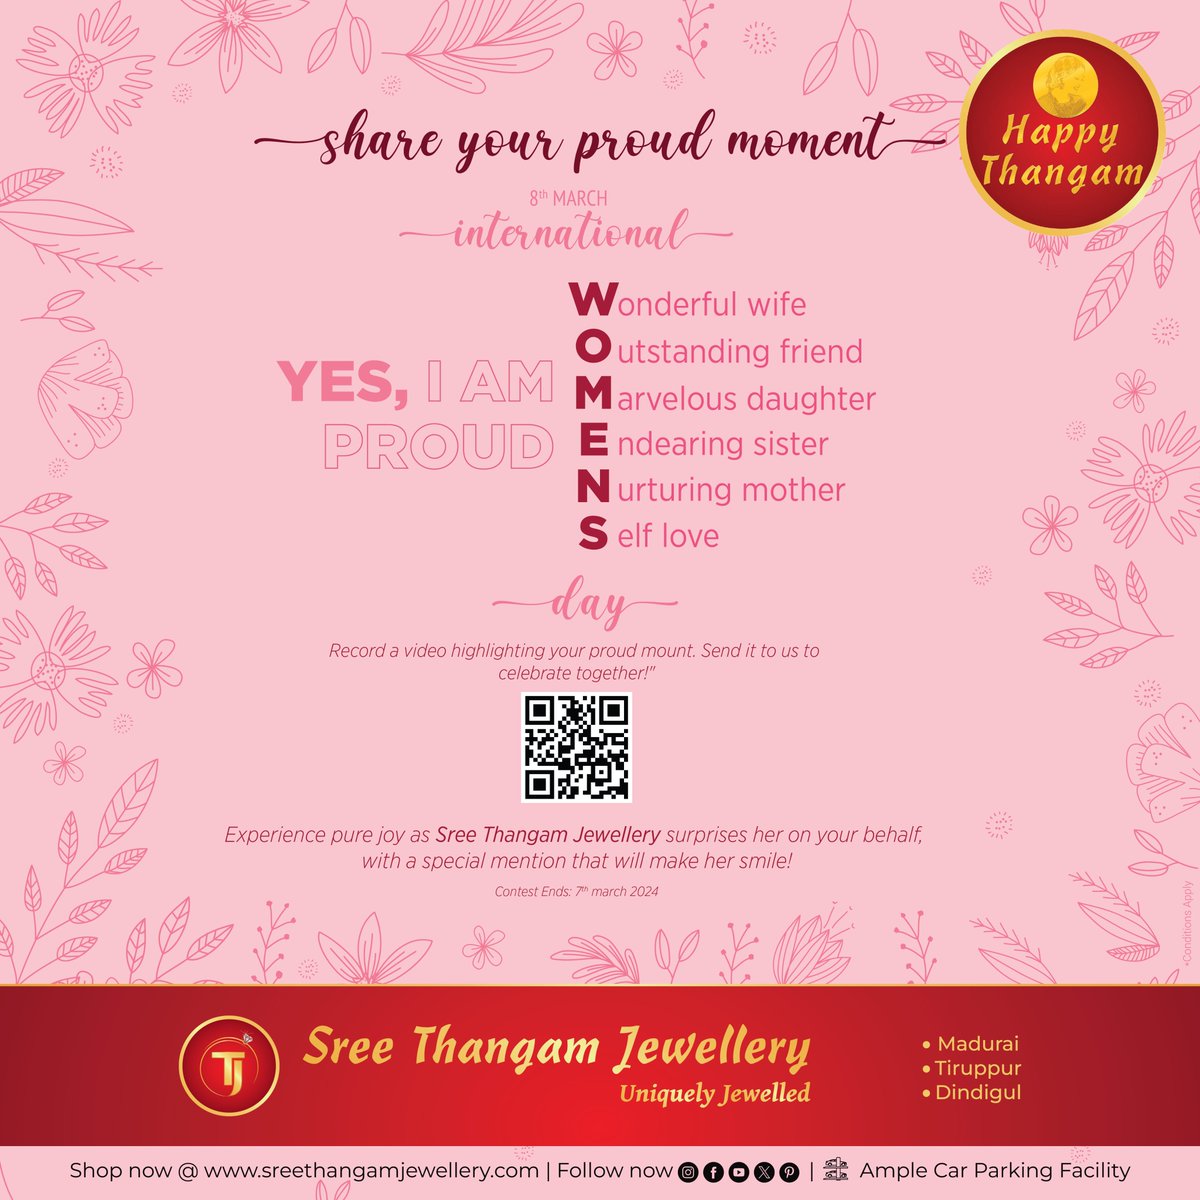 Celebrate Women's Day with Sree Thangam Jewellery! whatsform.com/5pEHU…For future designs and inquiries, What’s app us at 075388 94111 #happythangam